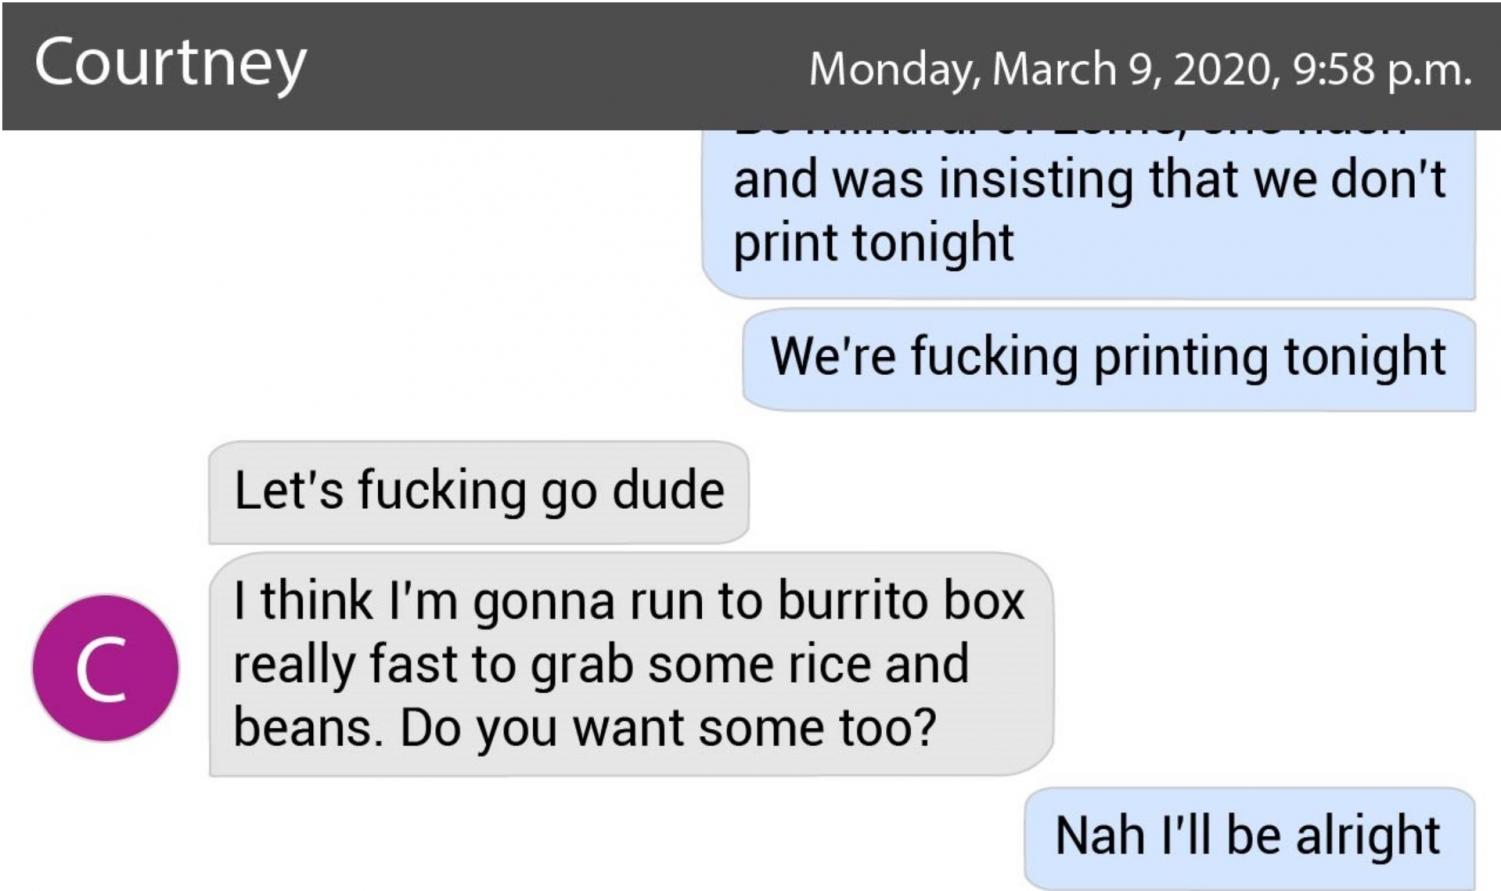 graphic of a text conversation between owen and courtney that reads: "...and was insisting that we don't print tonight. we're fucking printing tonight." "let's fucking go dude. i think i'm gonna run to burrito box to grab rice and beans. Want some?" "I'll be alright"